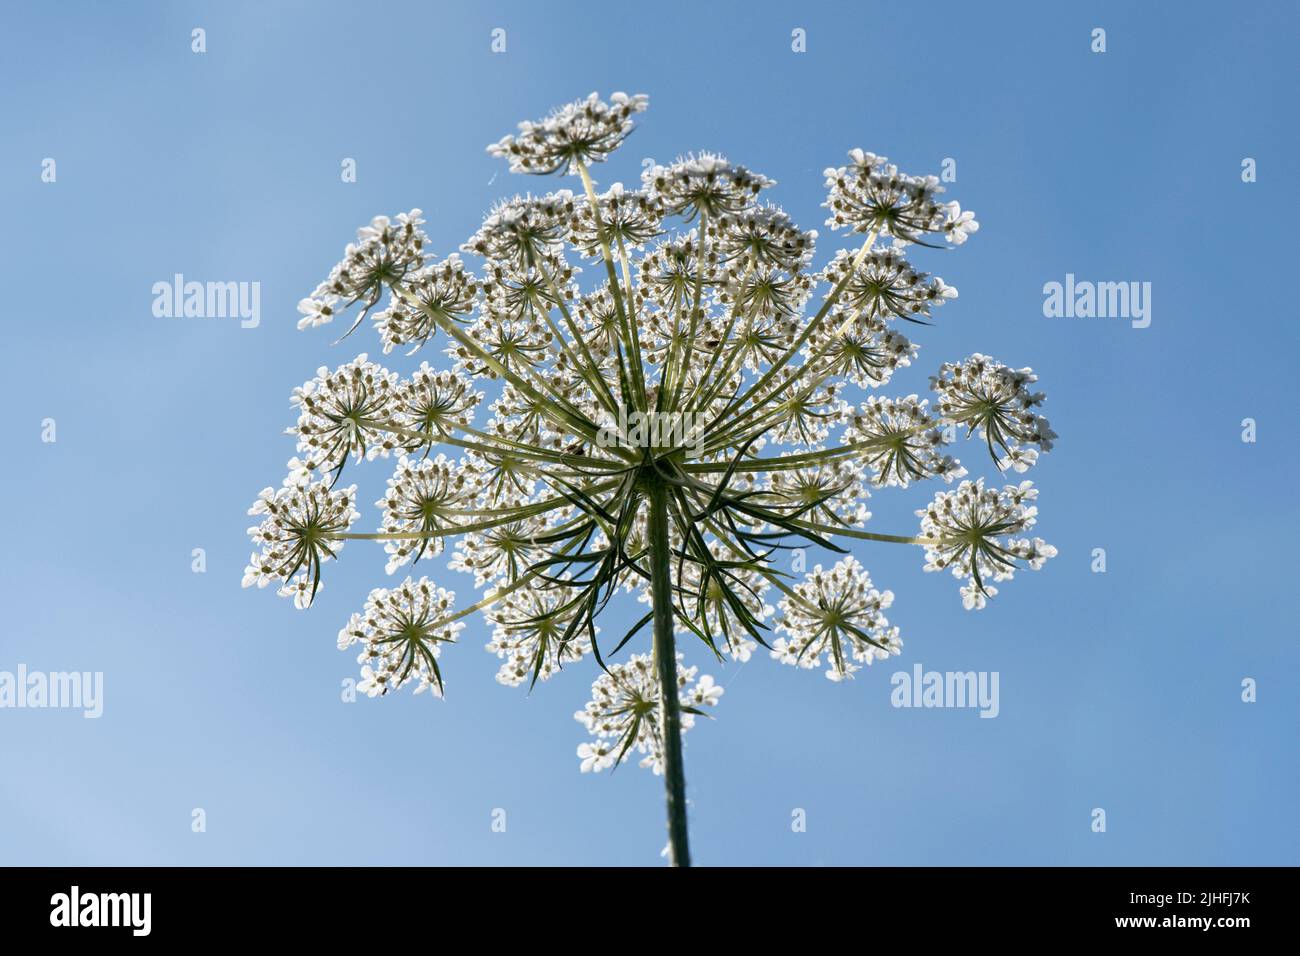 Wild carrot or Queen Anne's lace (Daucus carota) looking up at a flowering umbel and green bracts against a blue sky, Berkshire, July Stock Photo